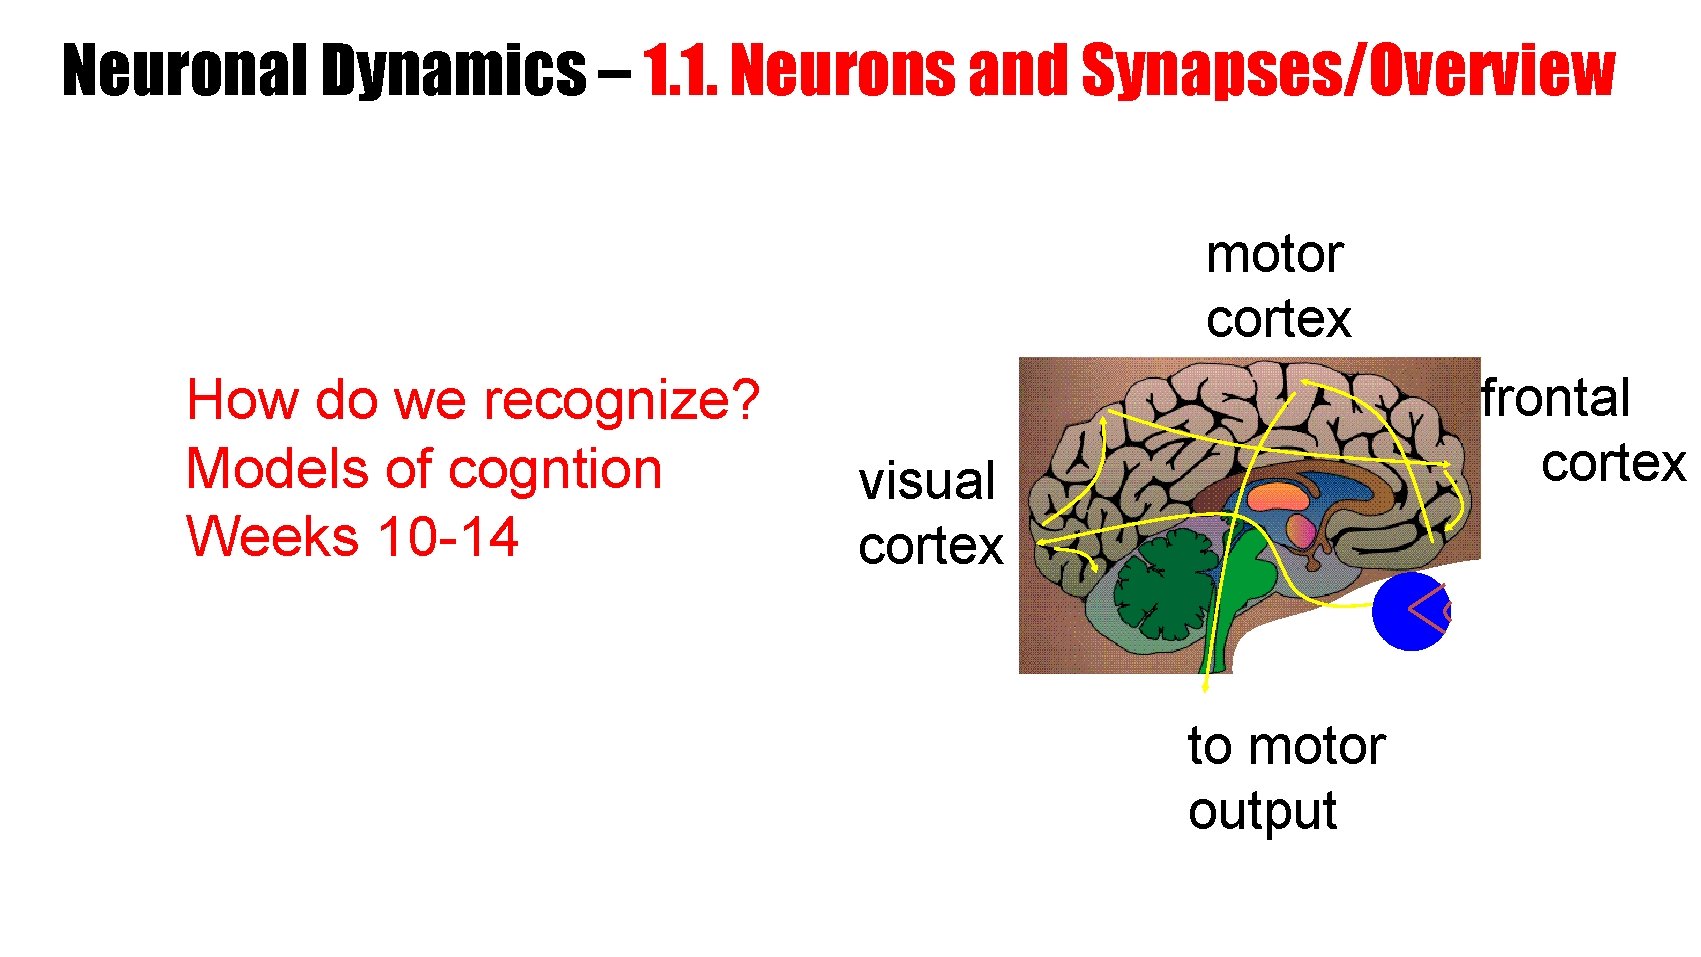 Neuronal Dynamics – 1. 1. Neurons and Synapses/Overview motor cortex How do we recognize?